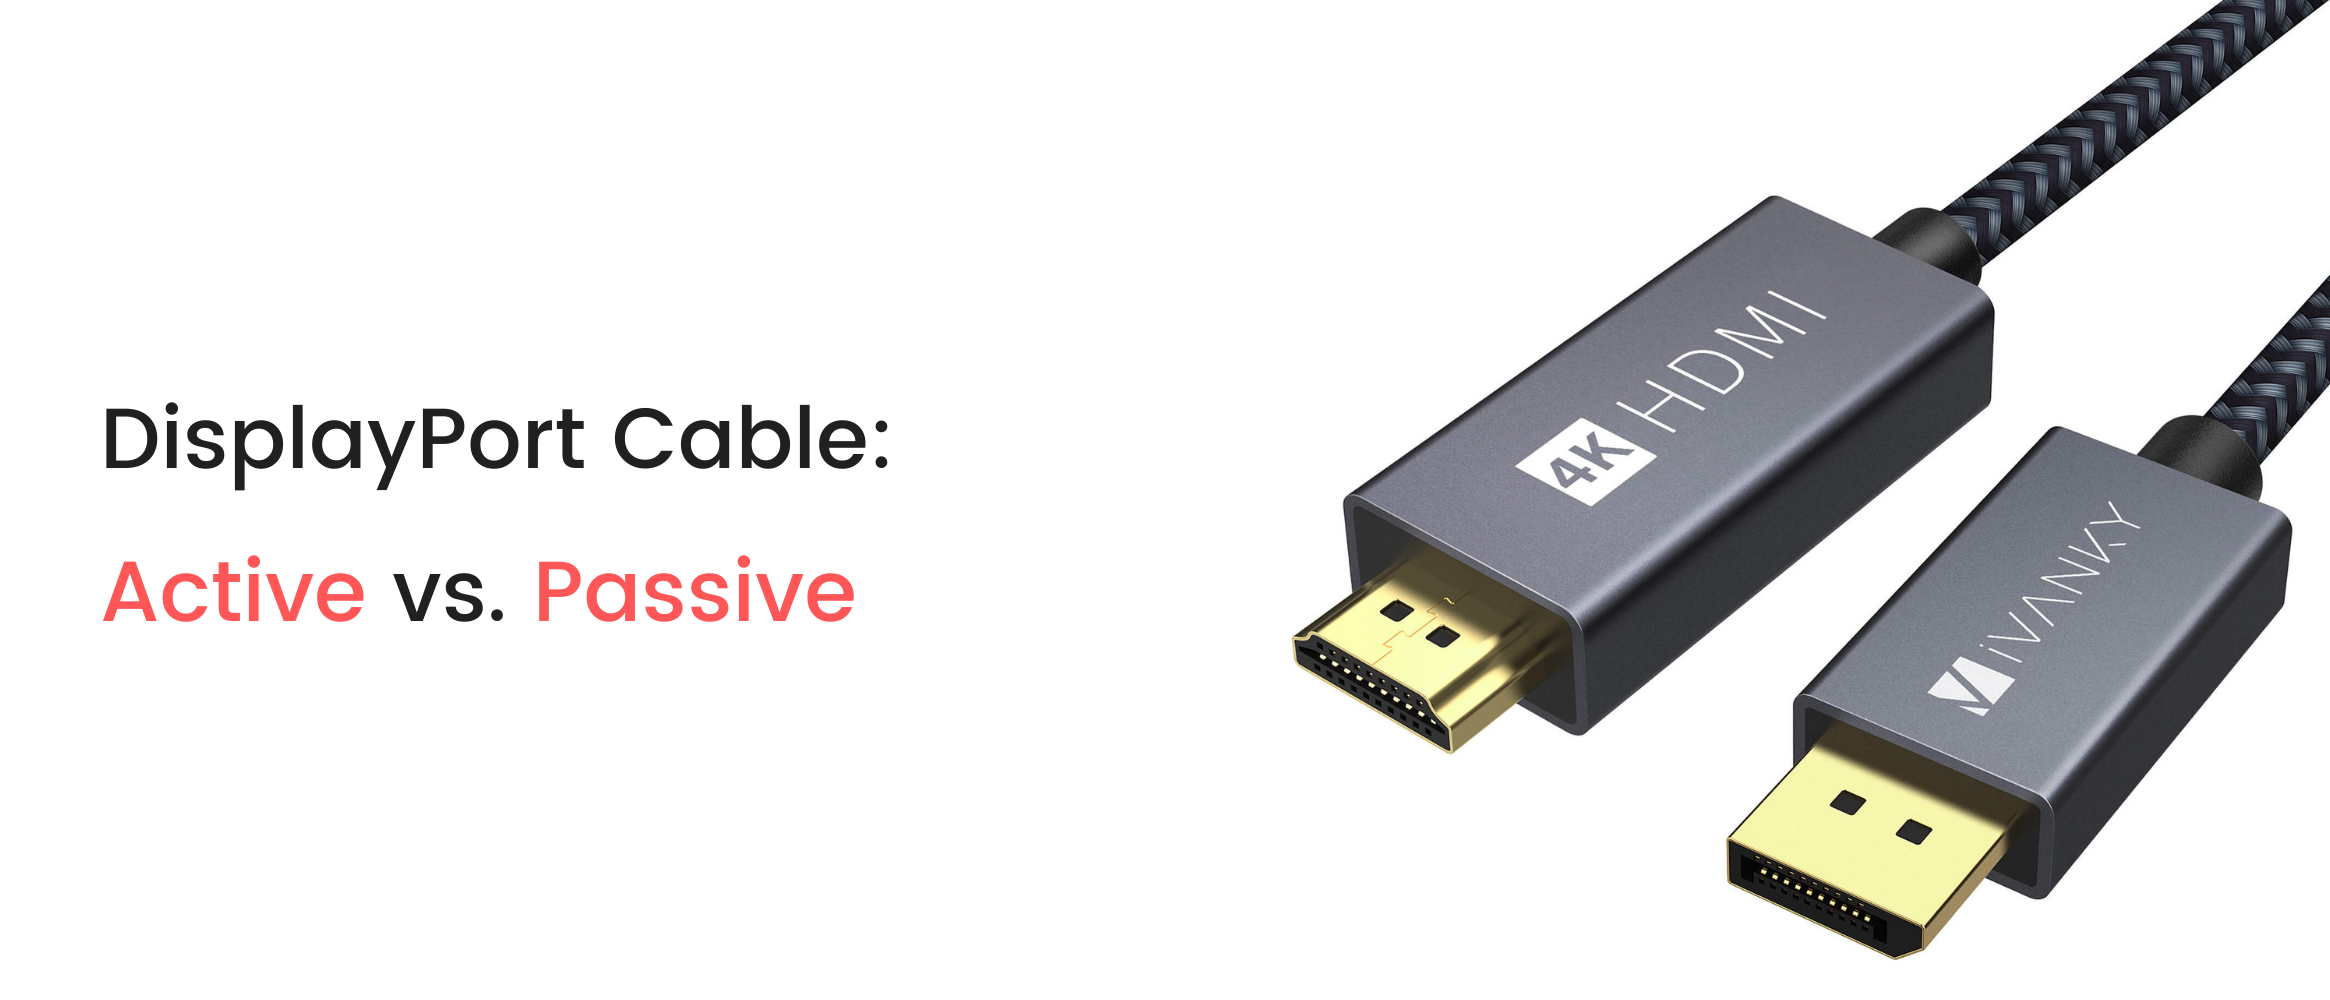 DisplayPort to HDMI: Do I Need an Active DisplayPort Cable? – iVANKY